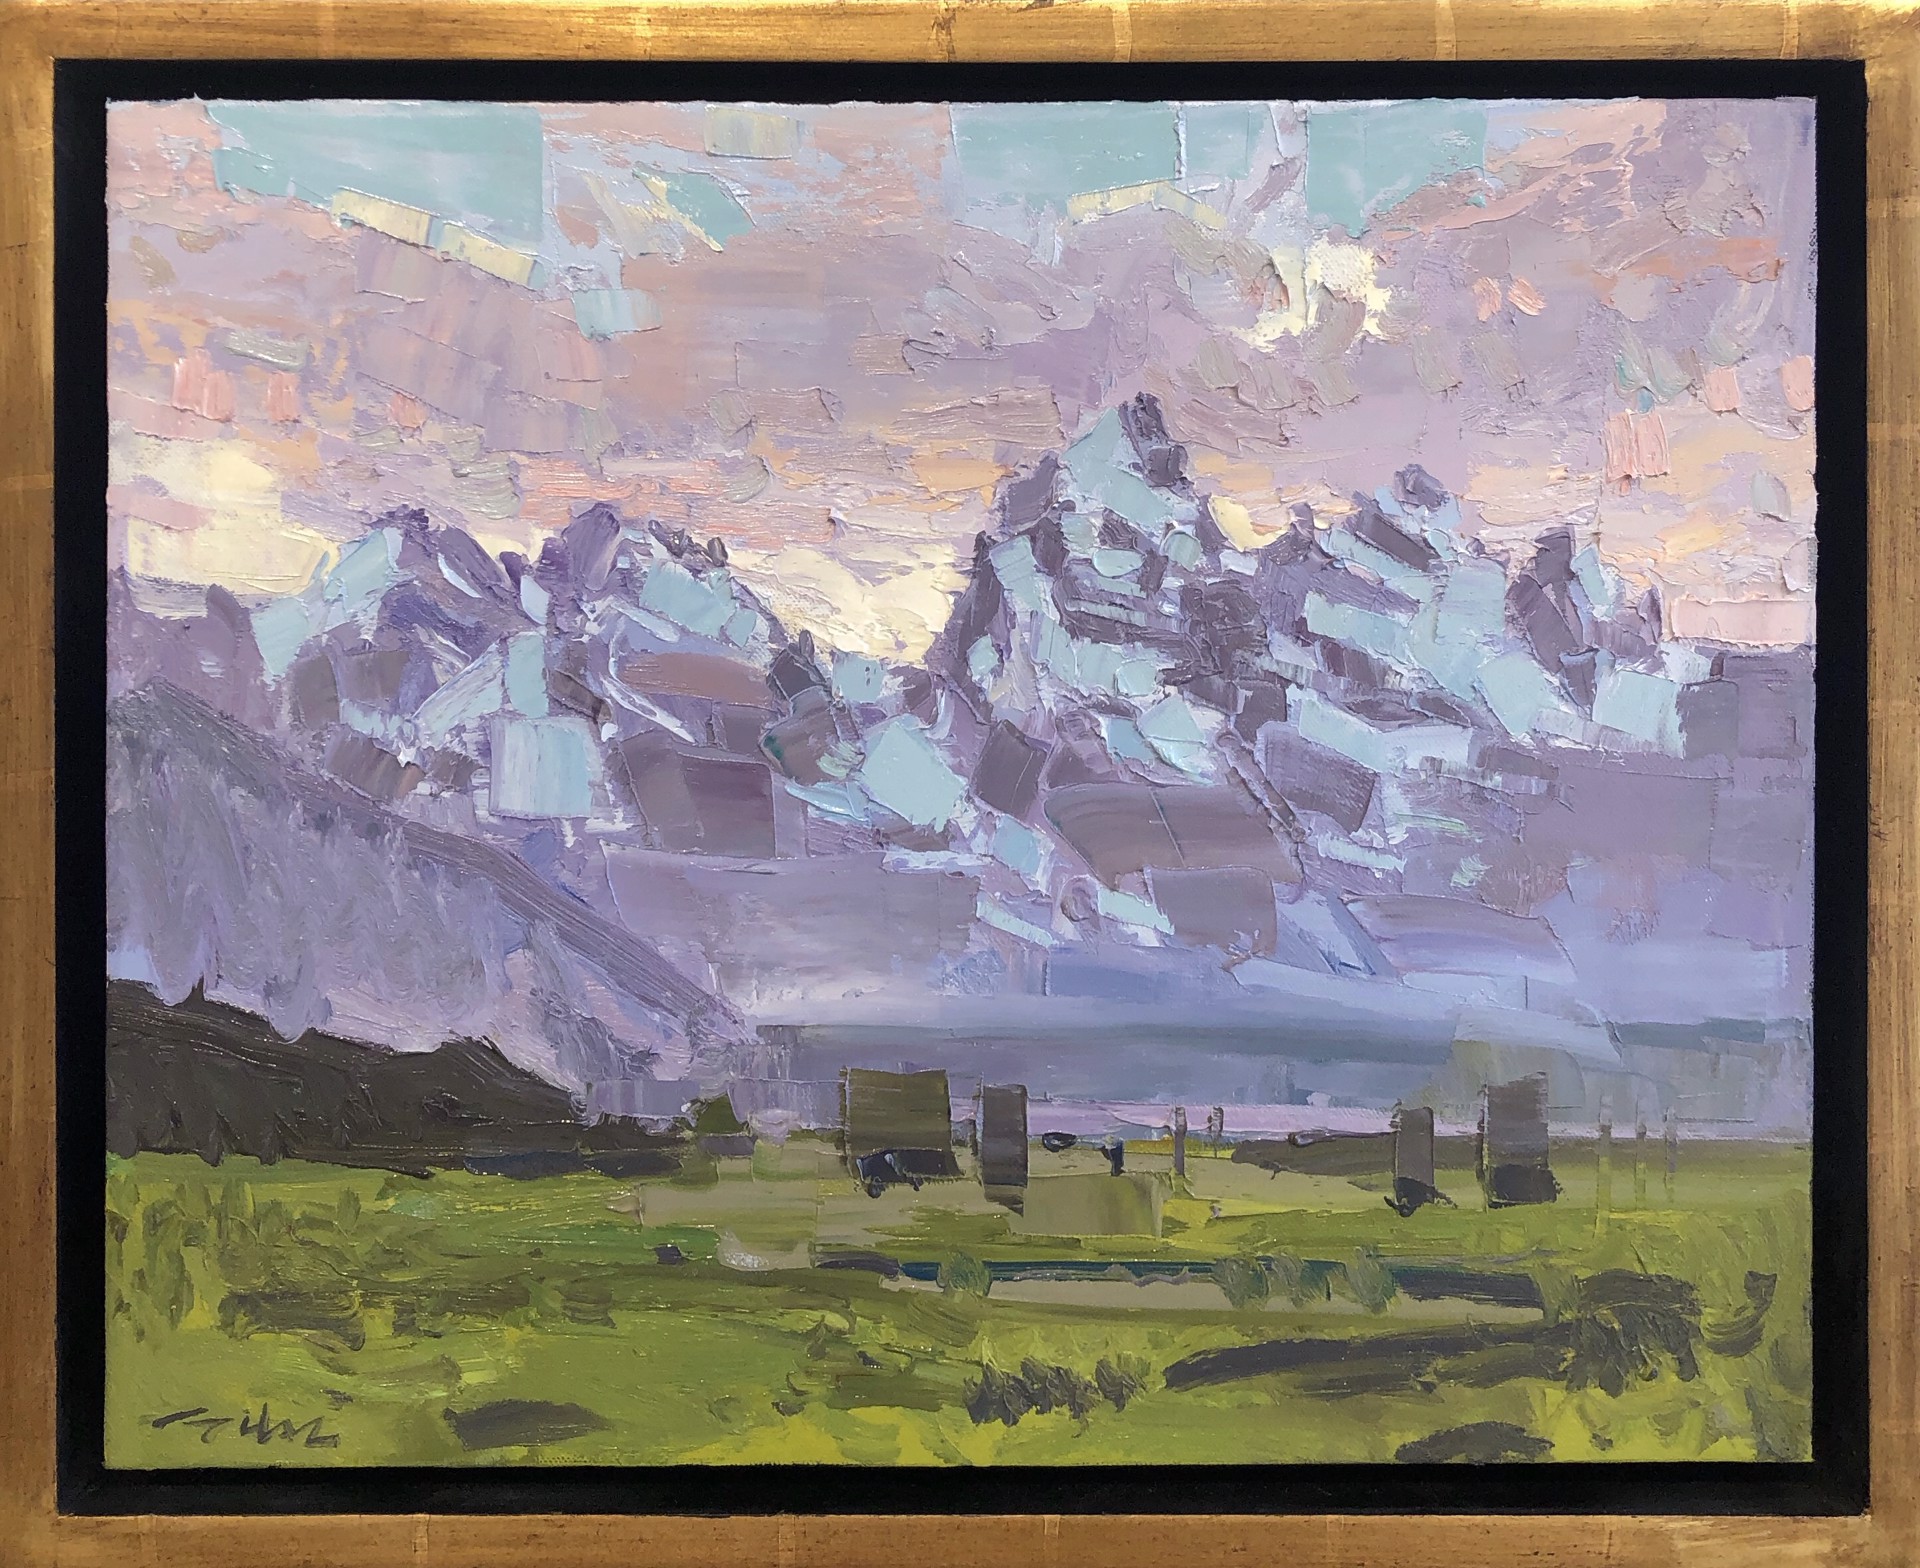 Plein Air Painting Of The Snowy Spring Teton Mountain Range And Green Valley Below At Sunset, By Silas Thompson  